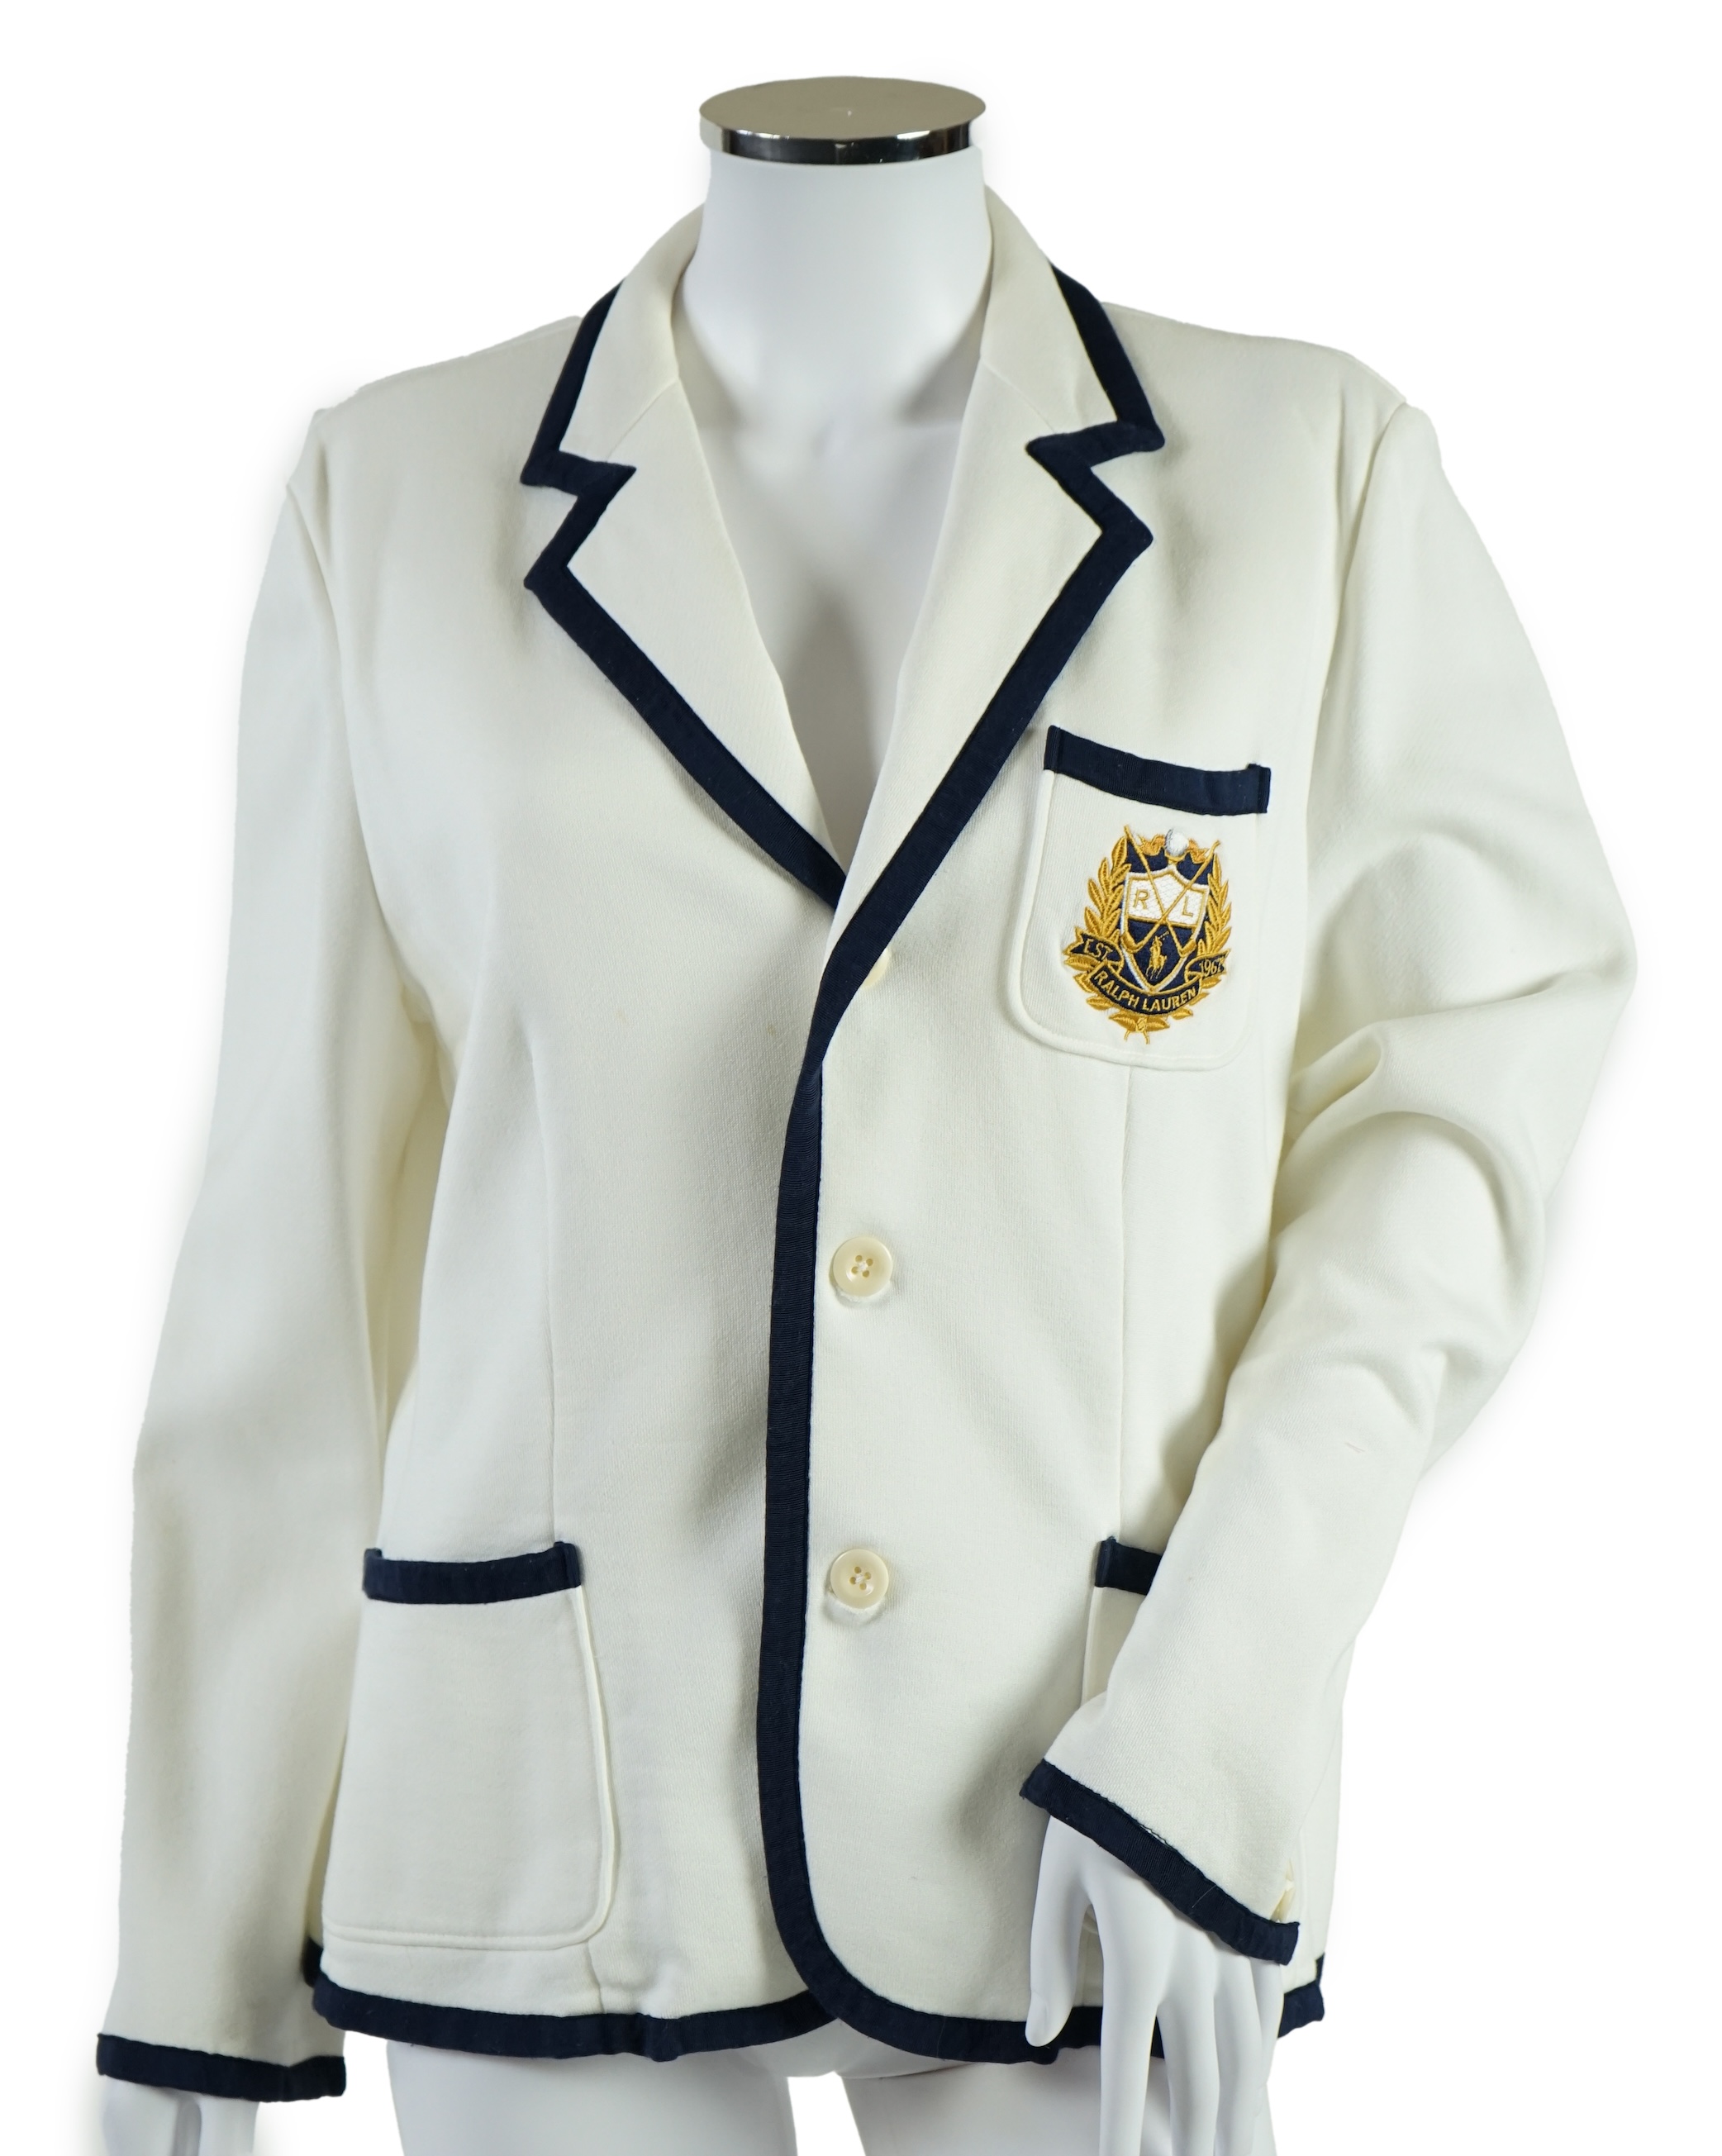 A cream Ralph Lauren blazer with navy blue cord piping. Proceeds to Happy Paws Puppy Rescue